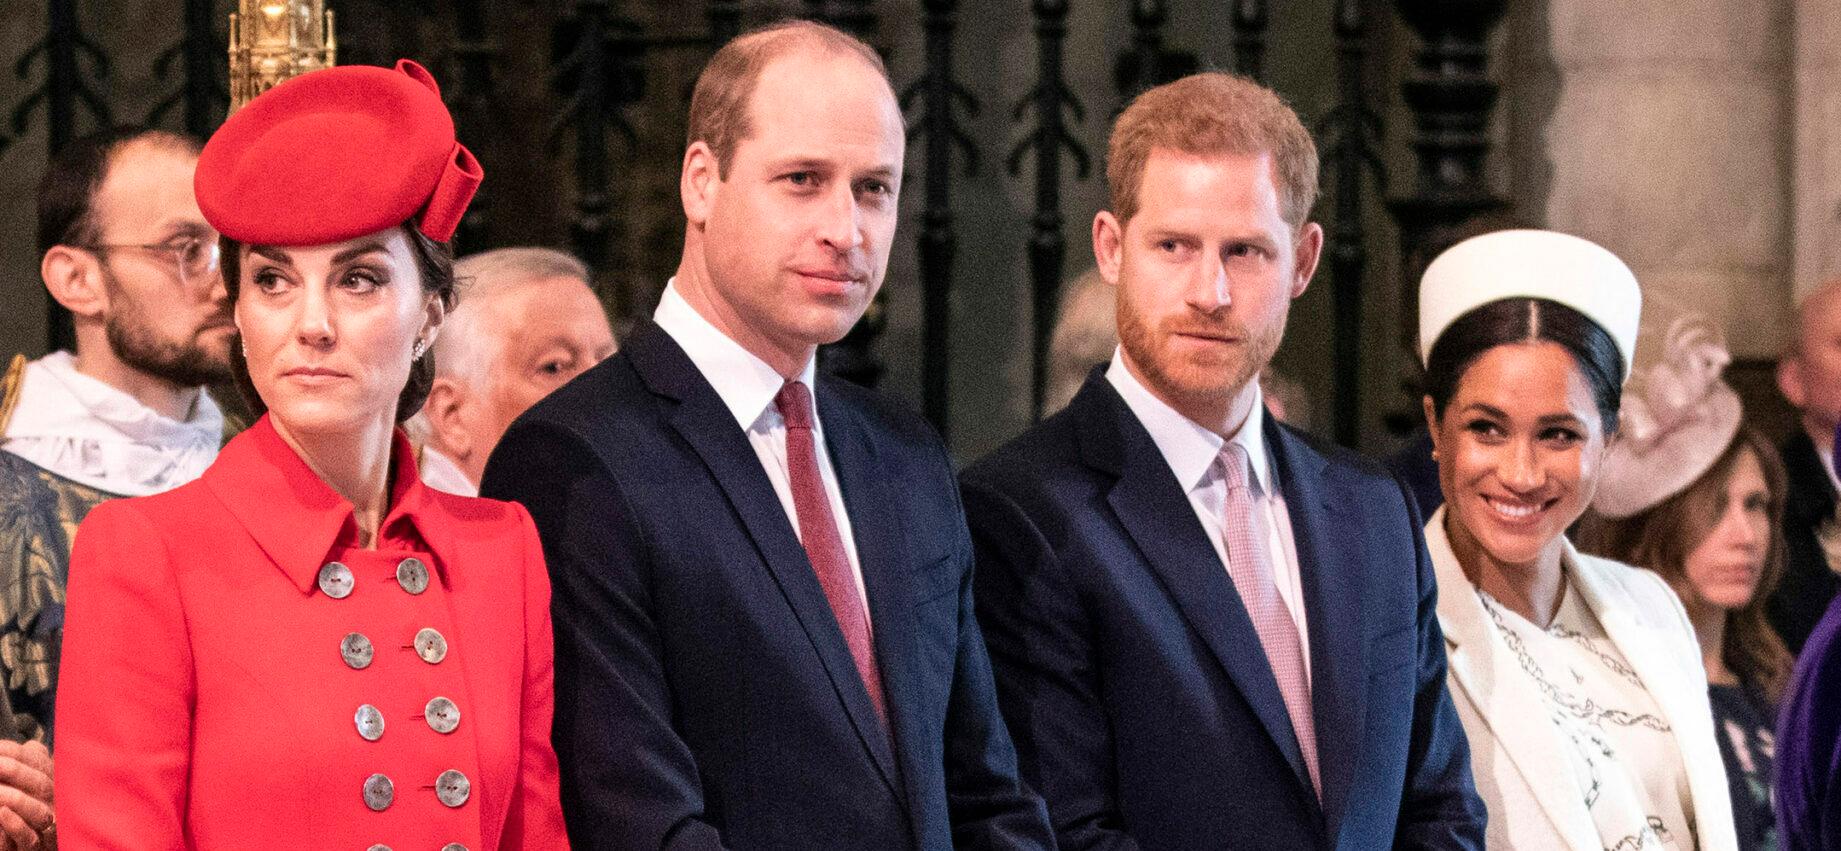 Royal Fans Slam Prince William’s Family Christmas Card For Bizarre Photoshop